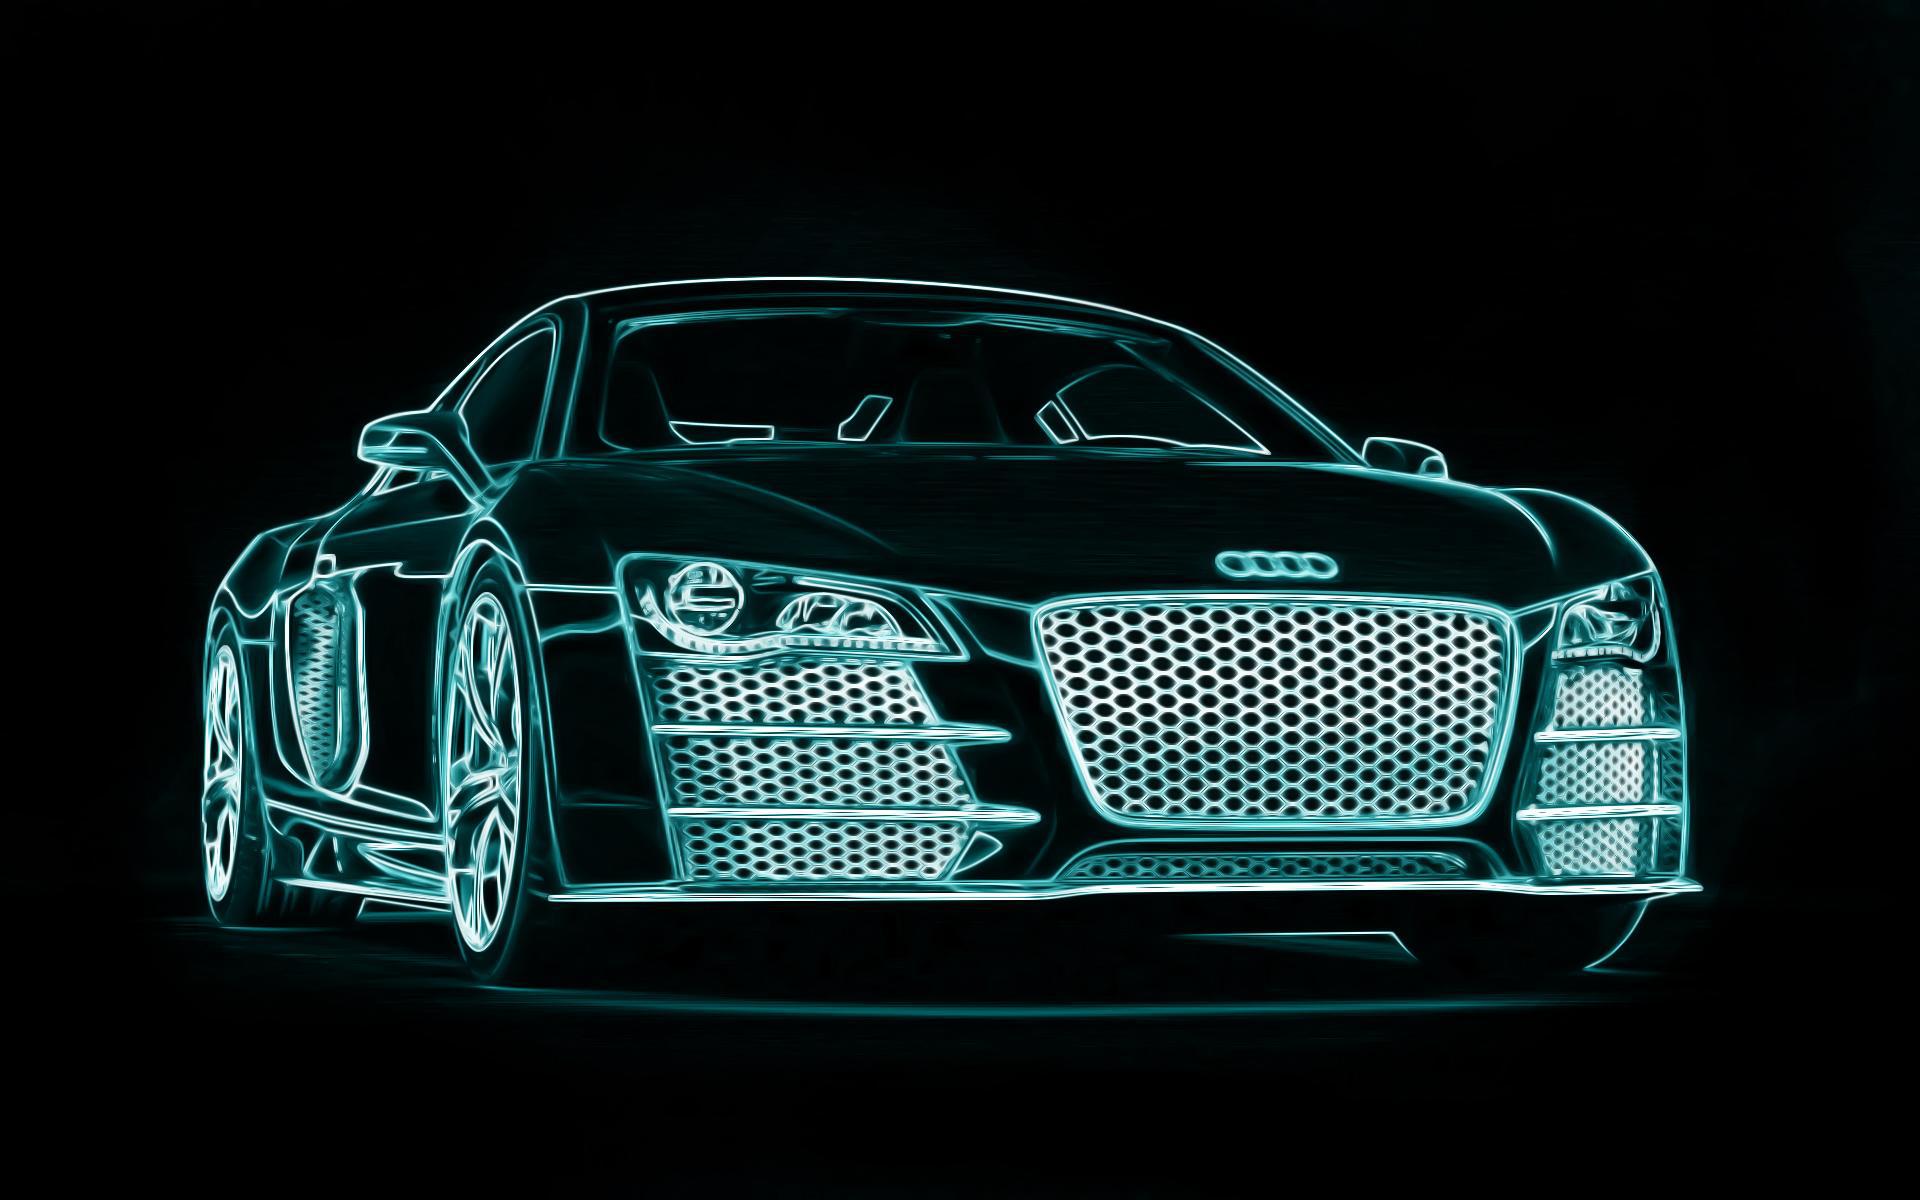 The Neon Audi Wallpapers And Images Wallpapers Pictures Photos